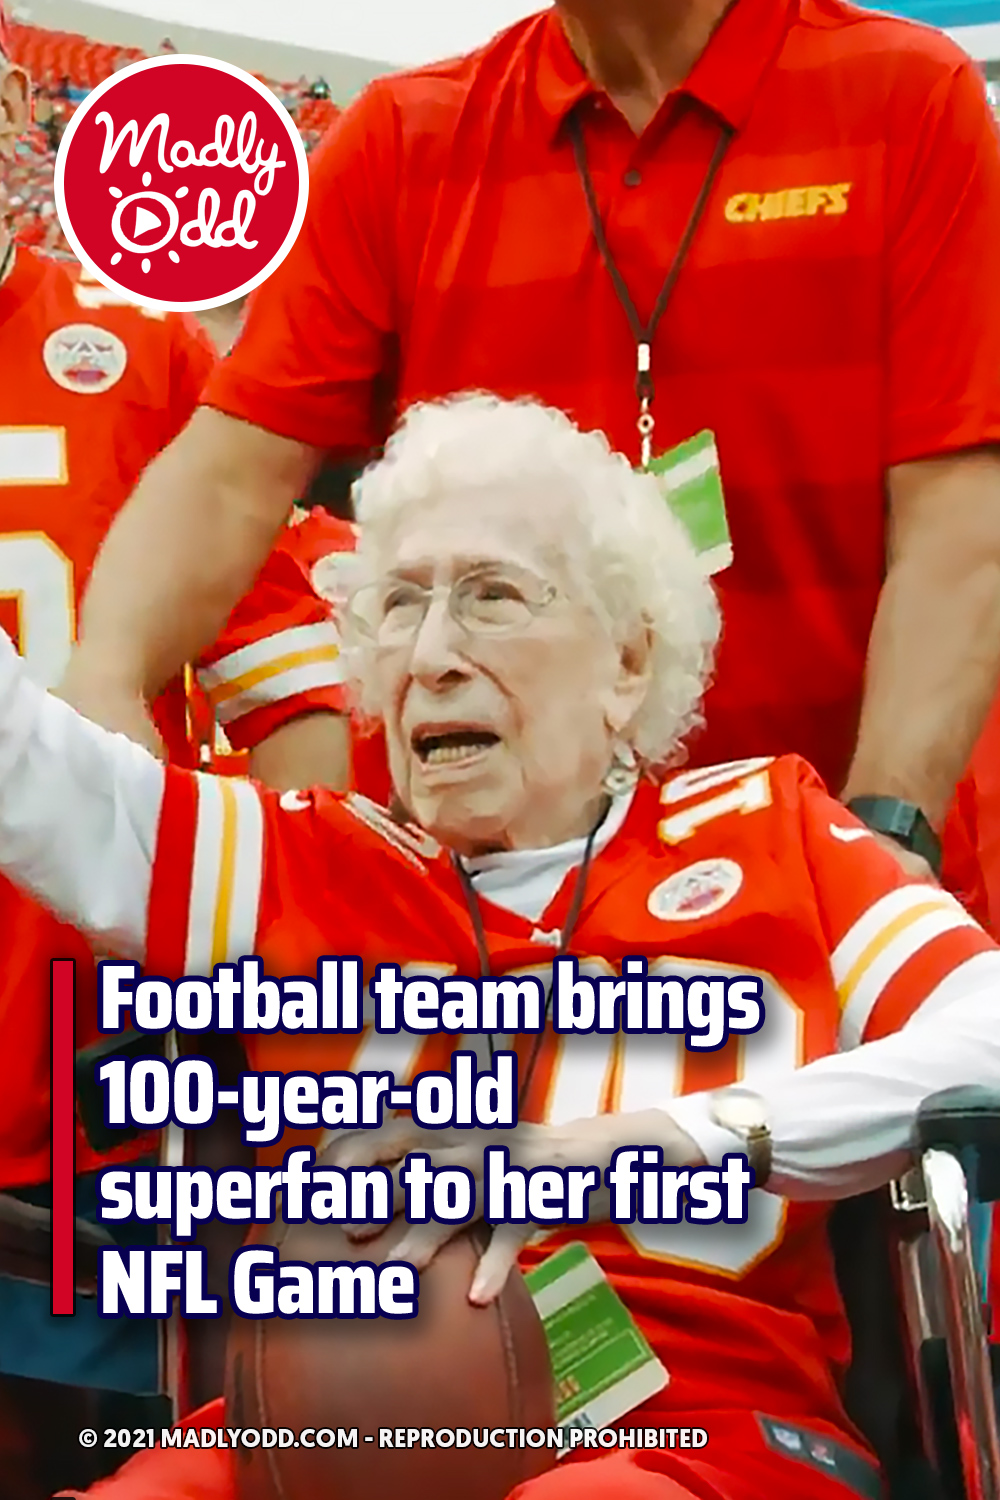 Football team brings 100-year-old superfan to her first NFL Game